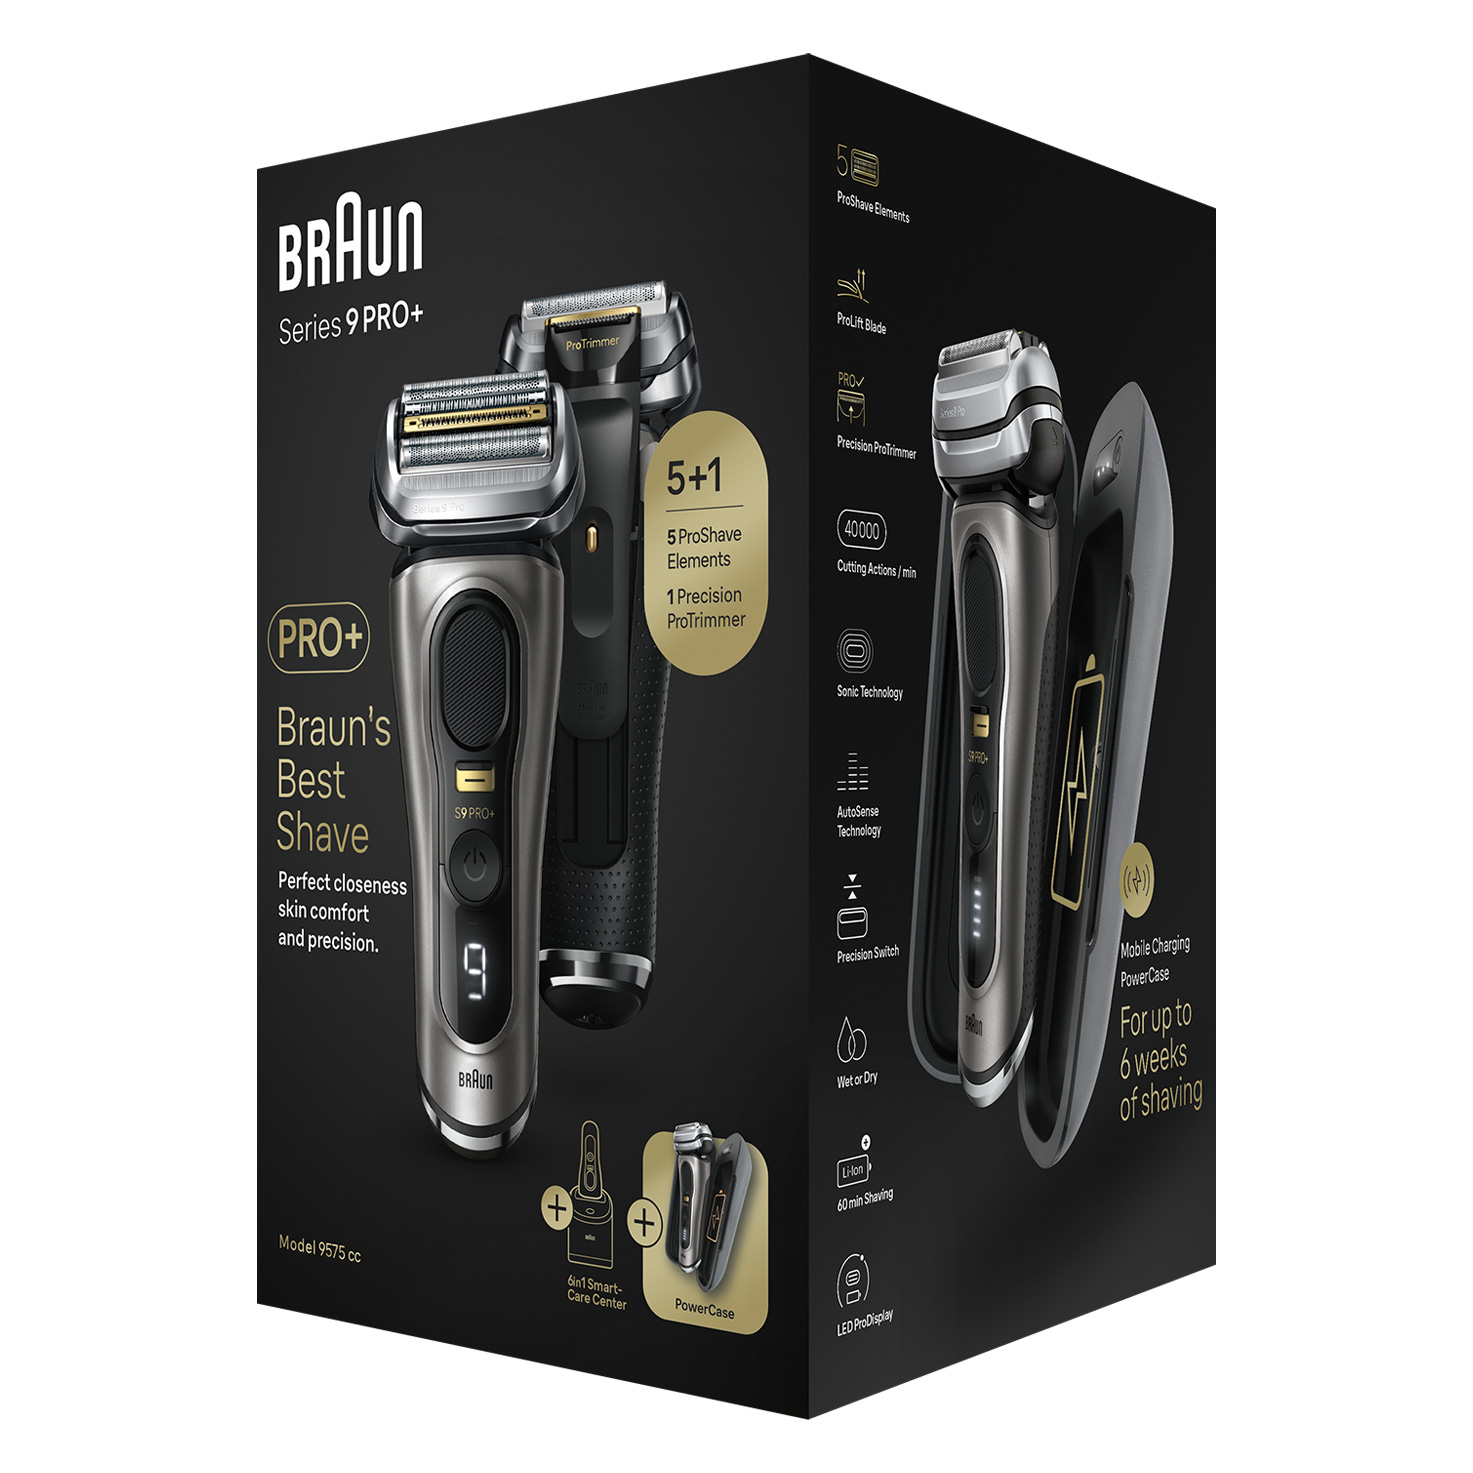 Series with UK Pro+ Braun ProTrimmer Braun | Shaver Electric 9